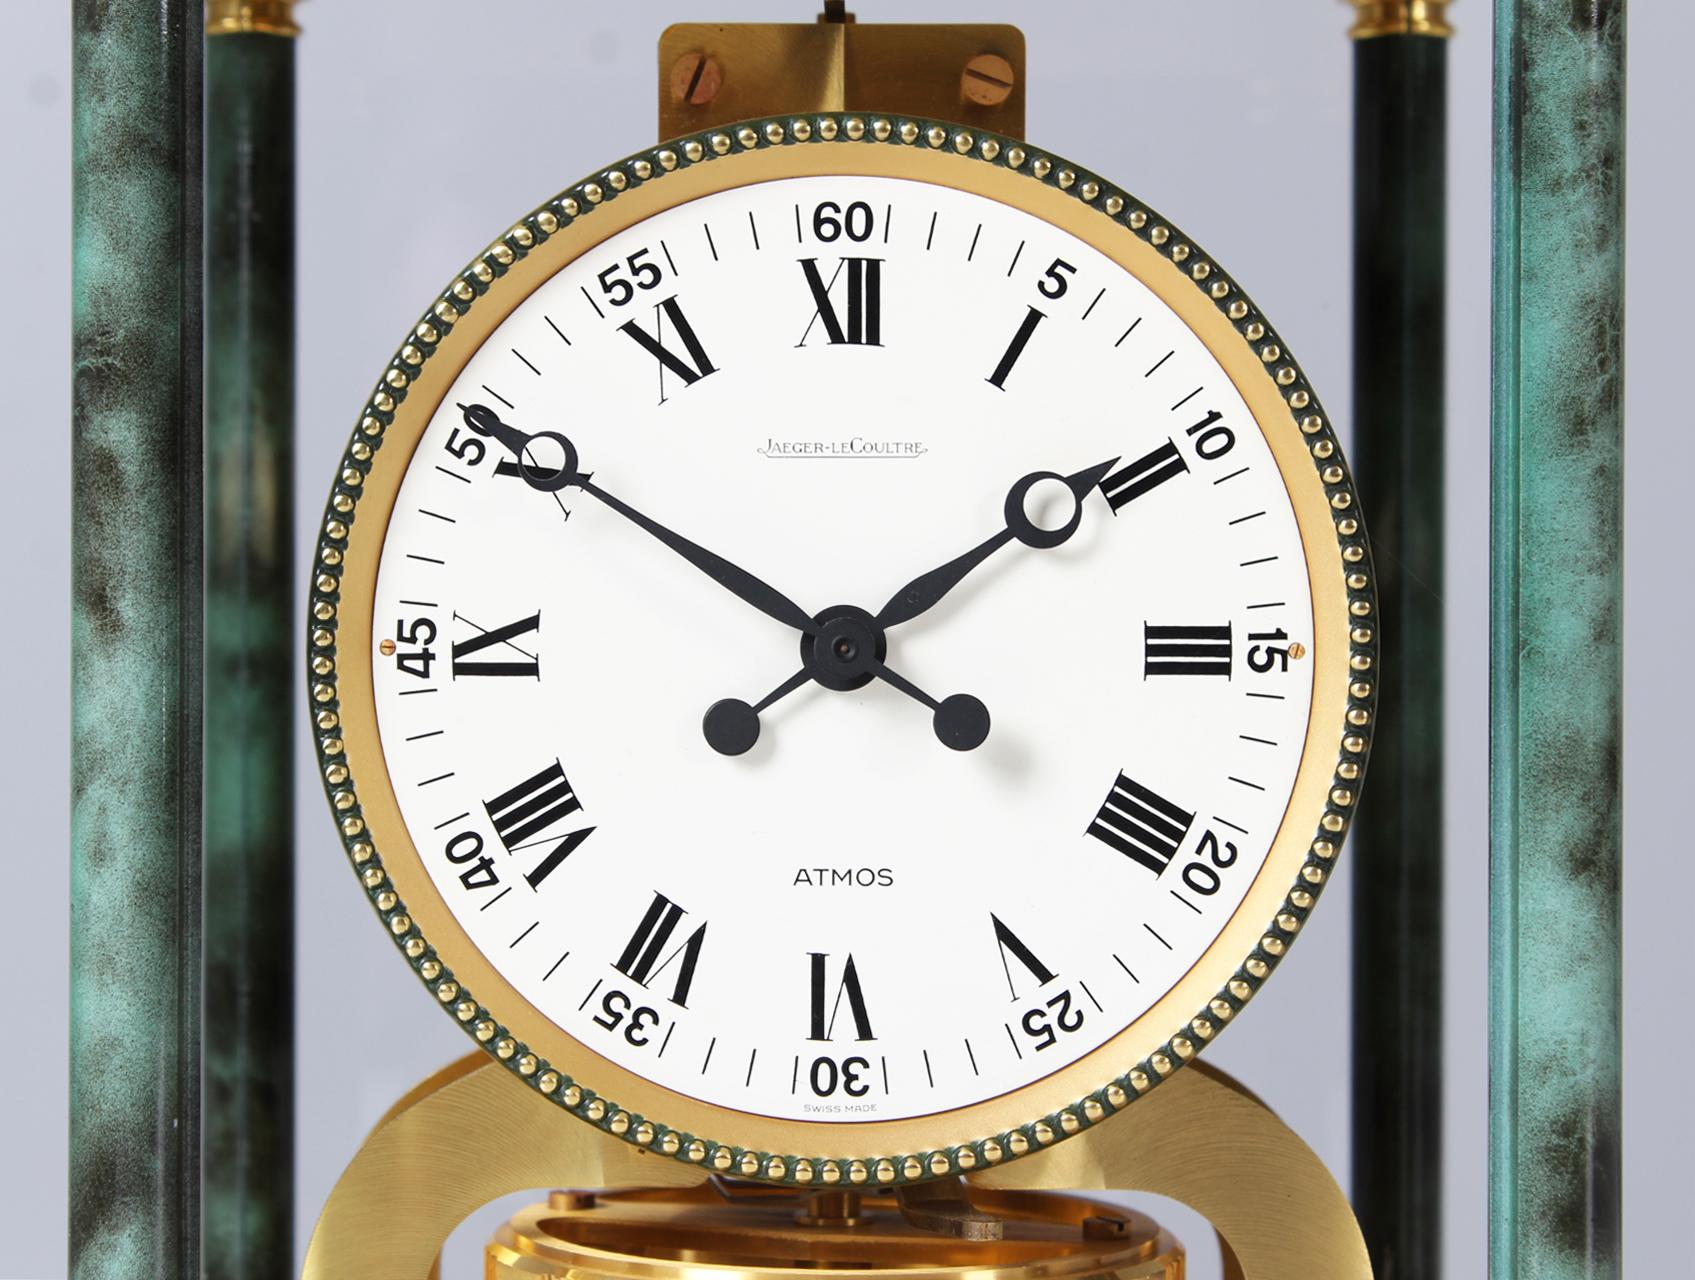 Jaeger LeCoultre, Atmos Vendome with marbled columns Ref. 5812

Switzerland
Brass gold plated and lacquered
Year of manufacture 1969

Dimensions: H x W x D: 24 x 21 x 16 cm

Description:
Atmos Vendome caliber 526 with gold plated base and